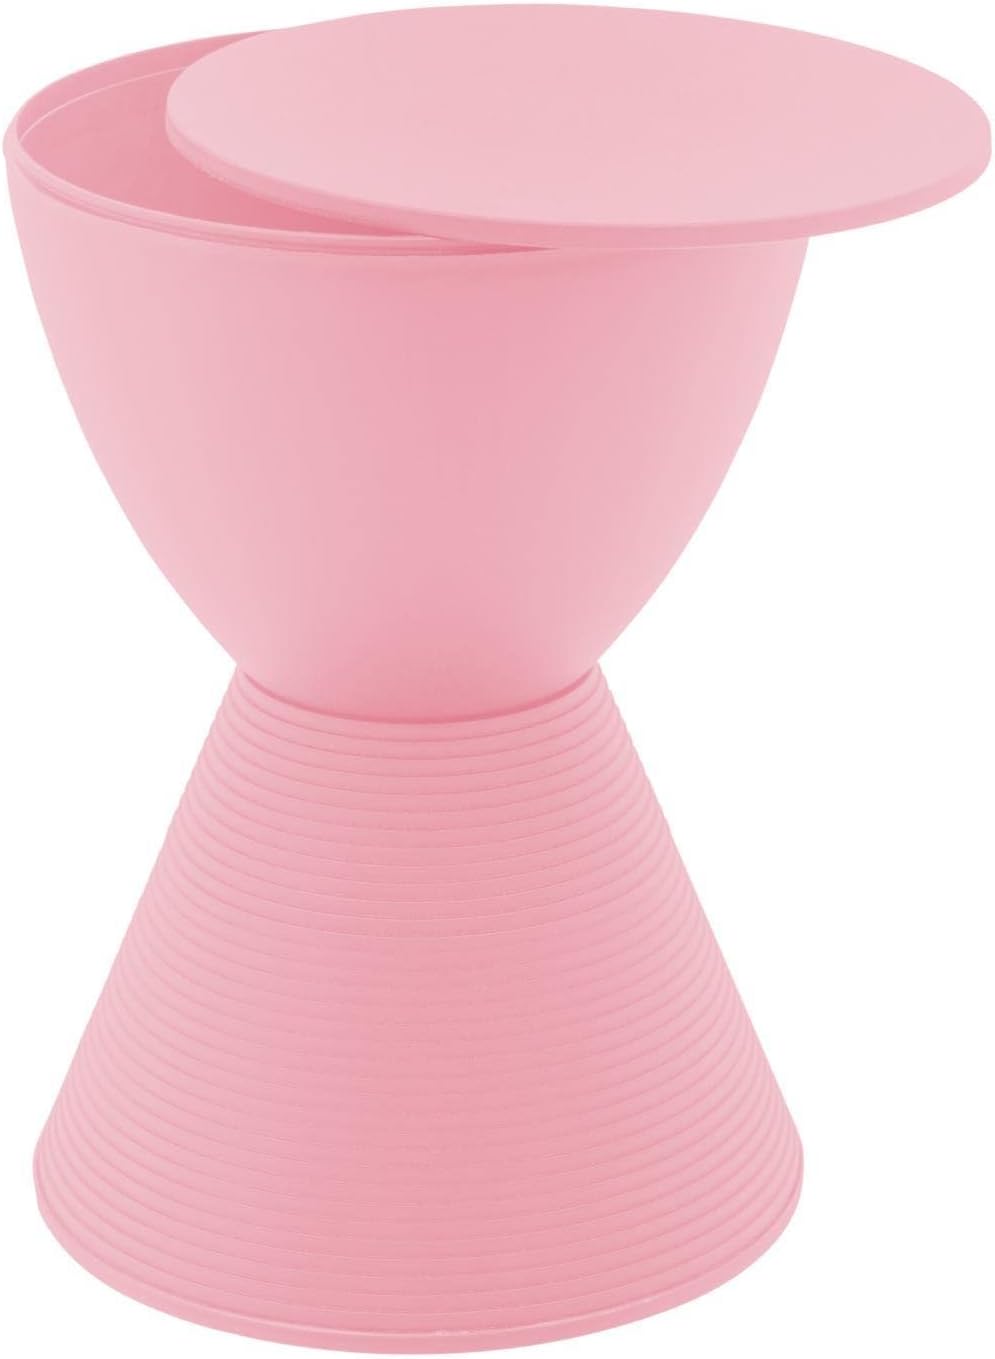 LeisureMod Boyd Modern Accent Side Table End Table Indoor and Outdoor Use, 16.75" H x 11.75" W x 11.75" D (Pink)